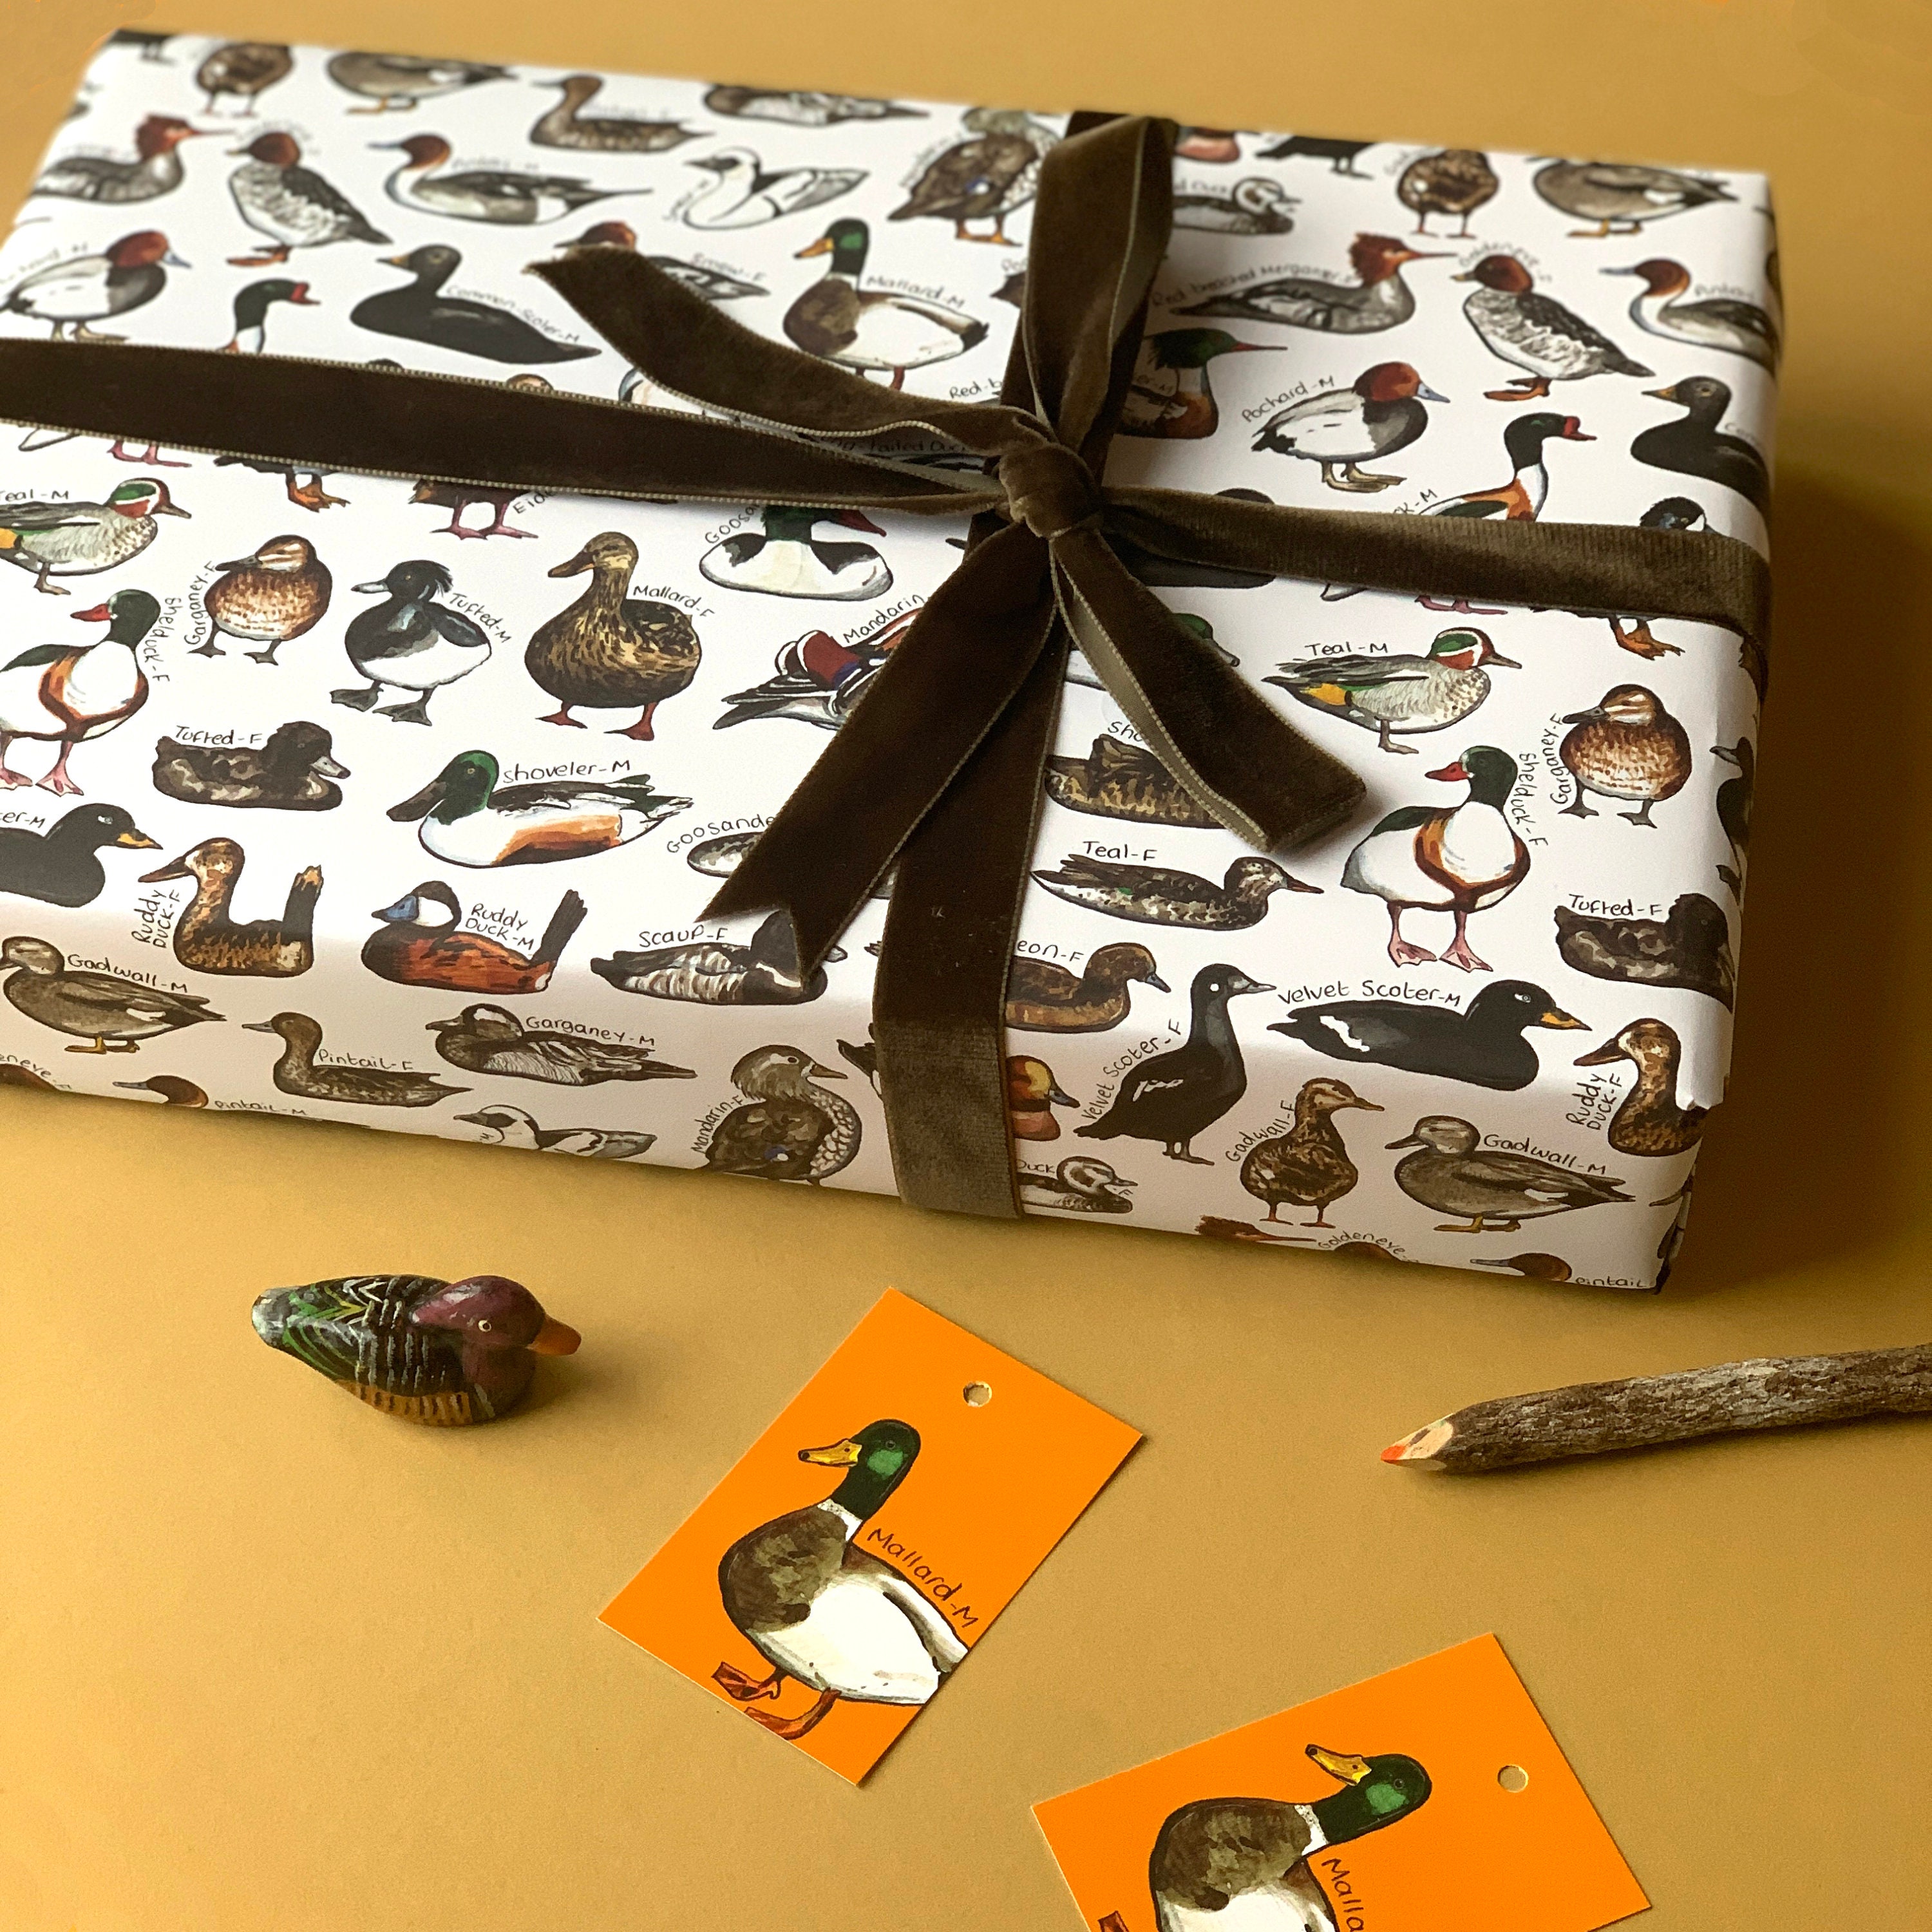 Brown Wrapping Paper with Feathers and Gold Ribbon • Ugly Duckling